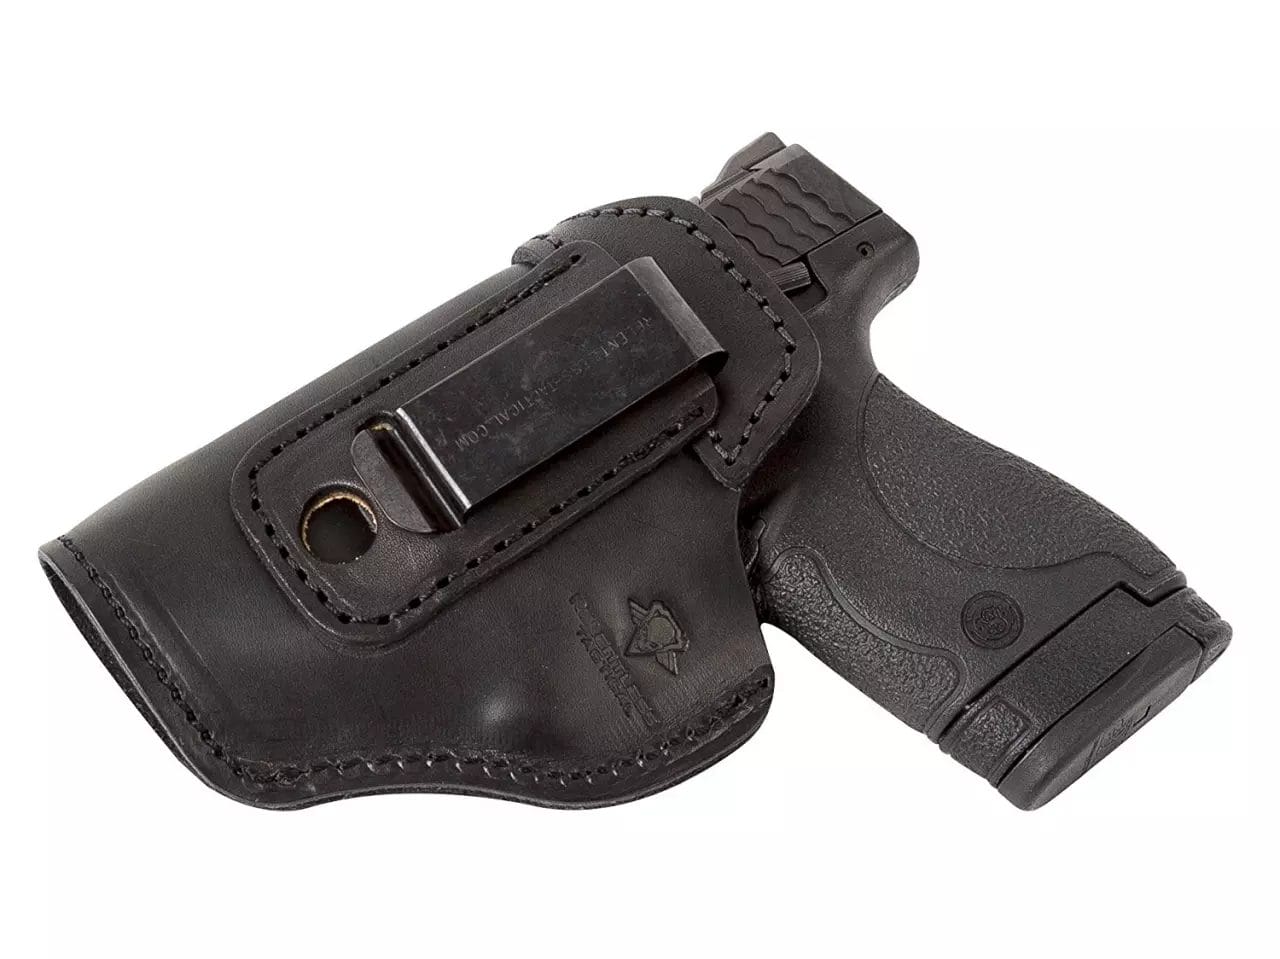 Relentless Tactical “The Defender” Leather IWB Holster